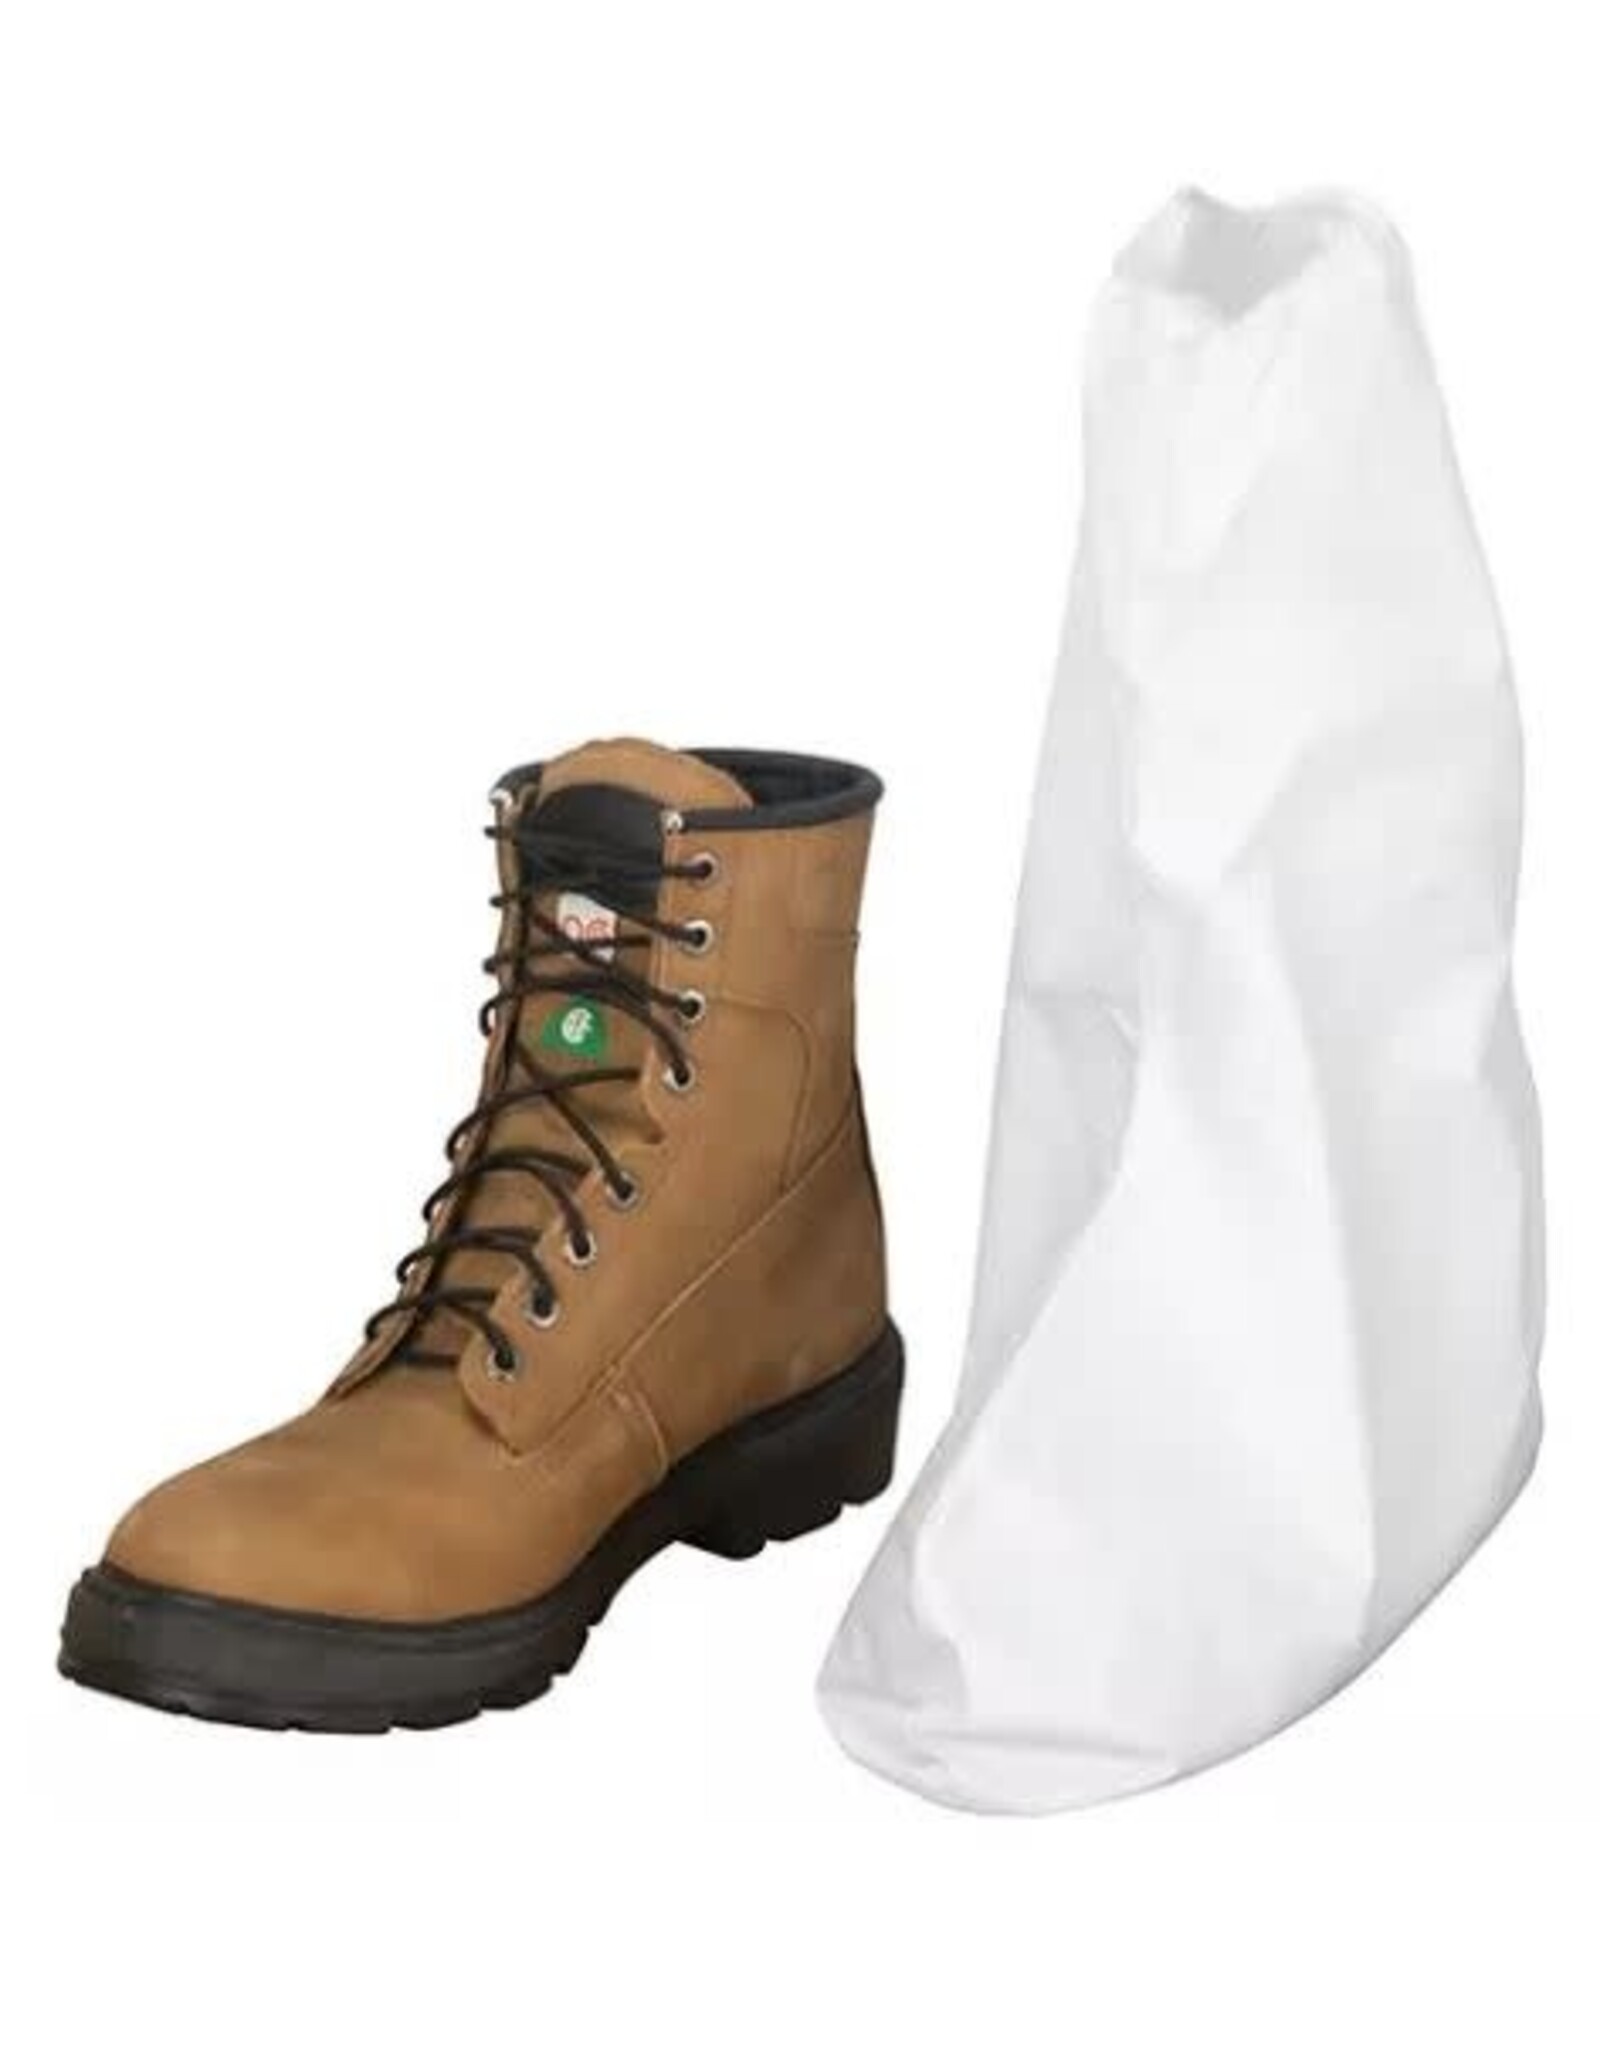 Microporus Boot Covers, One Size, 50/Pk